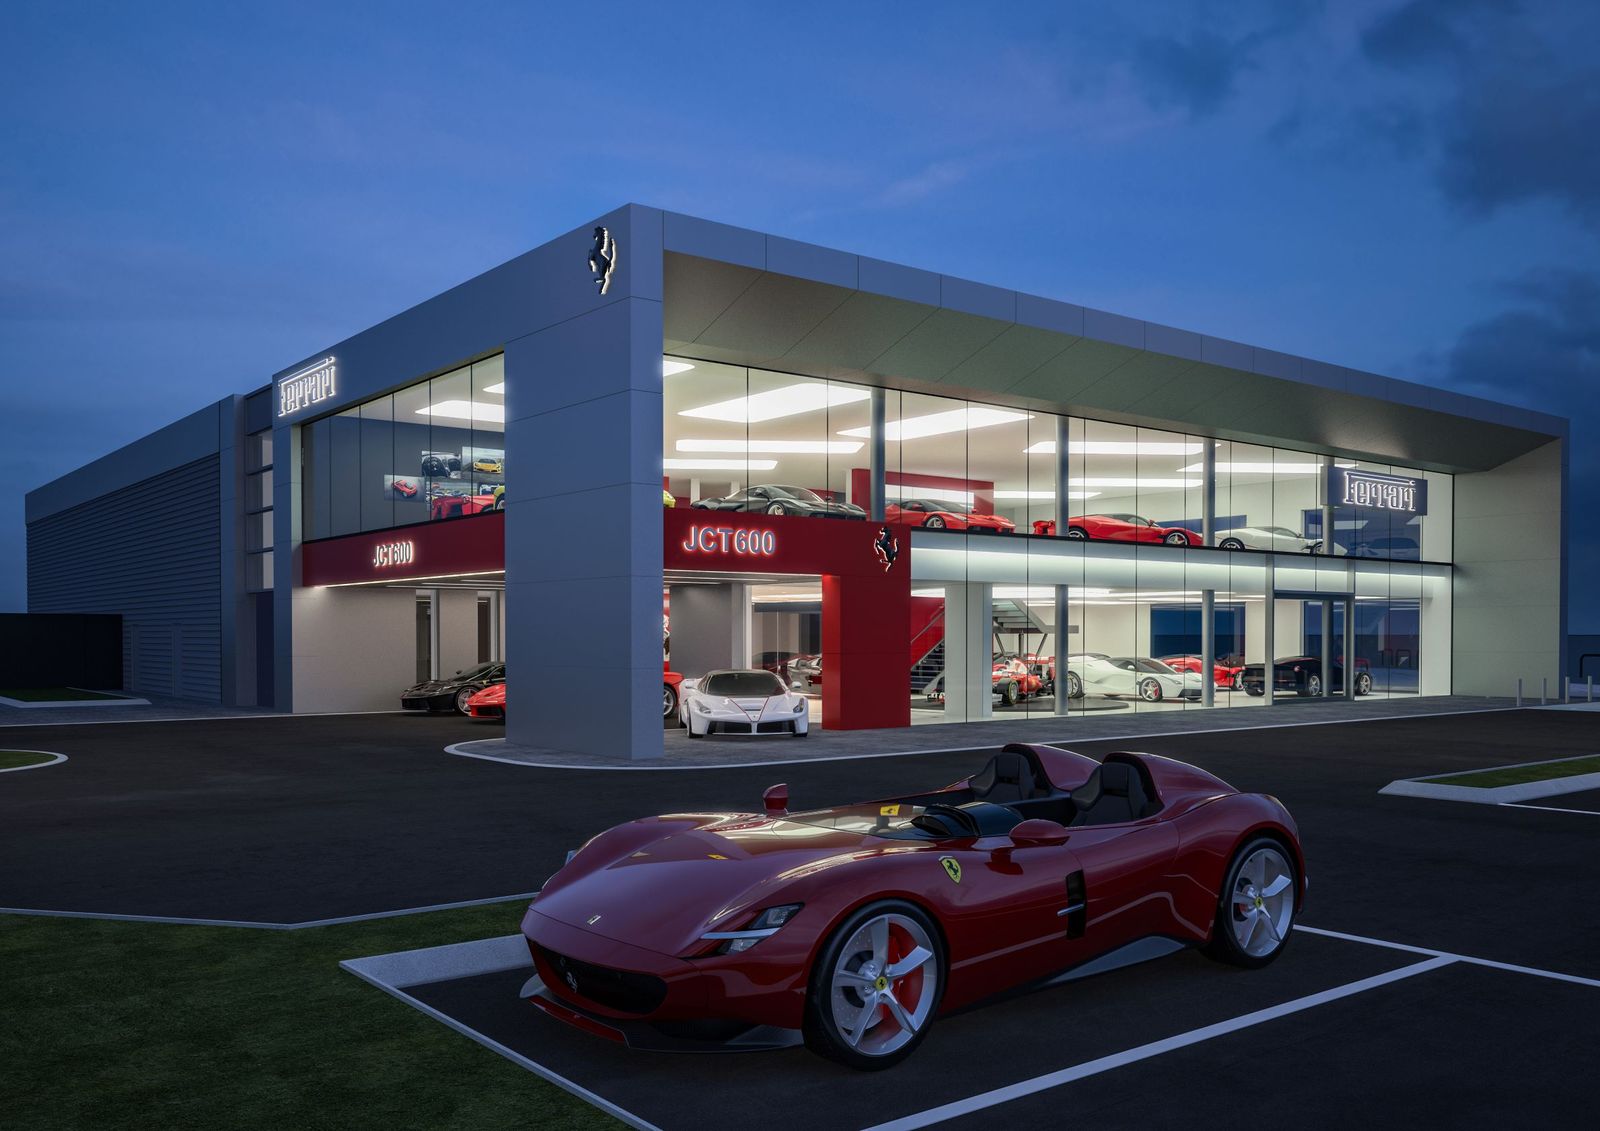 JCT600 starts work on £9m new Ferrari showroom and service centre in Leeds